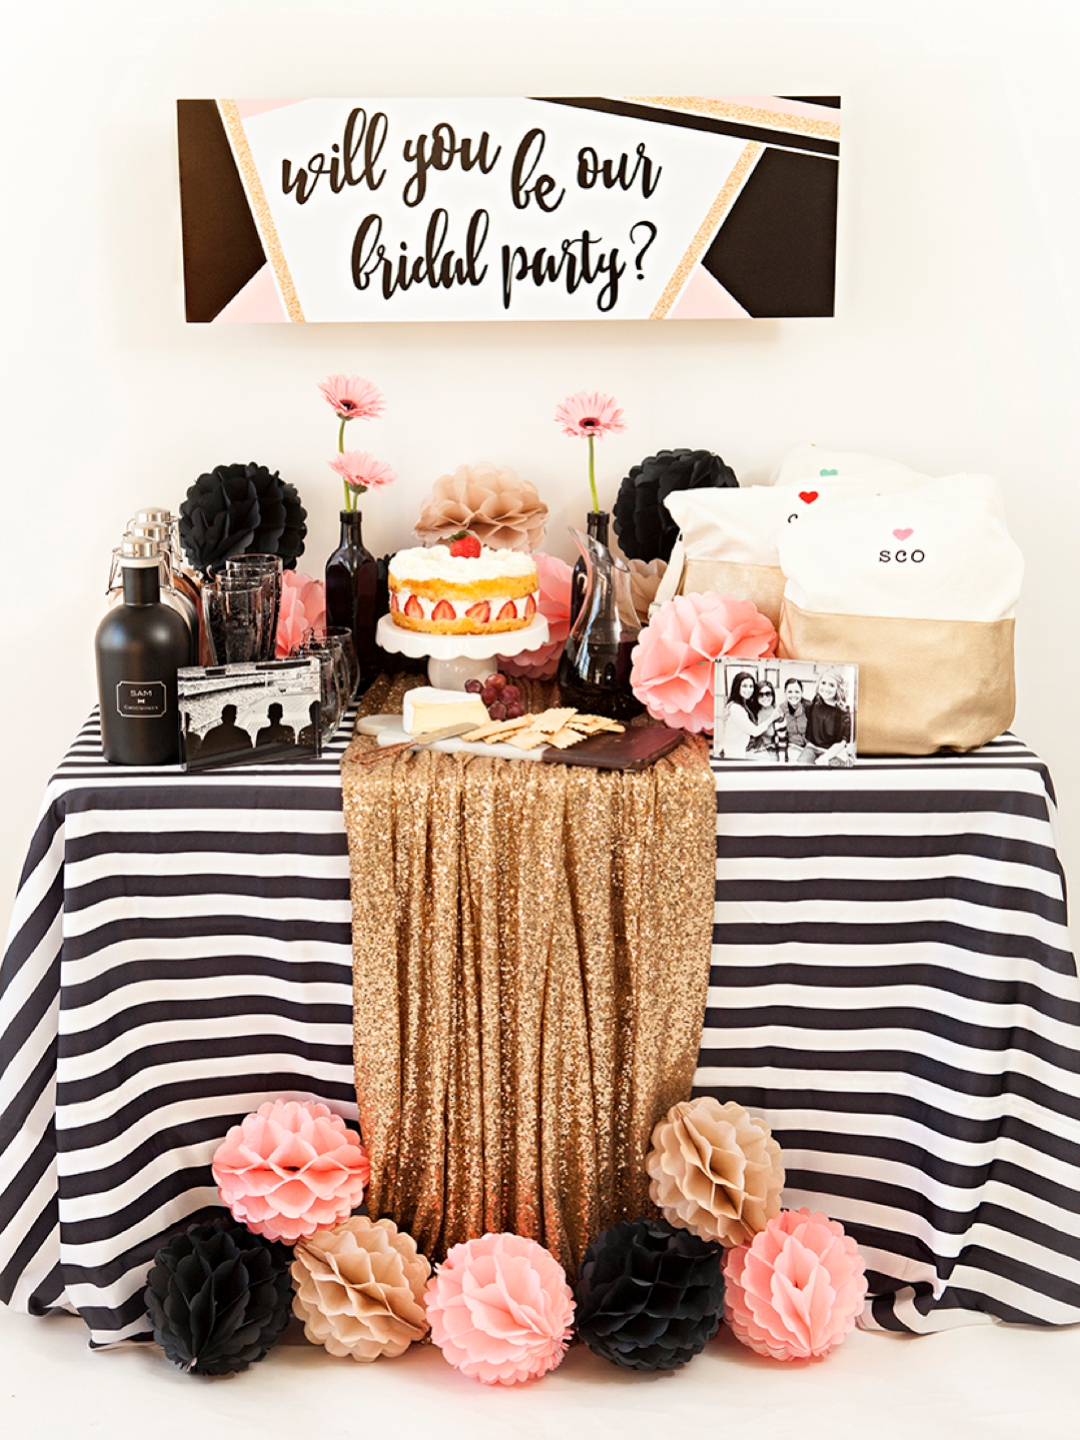 Adorable Will You Be Our Bridal Party, party idea!